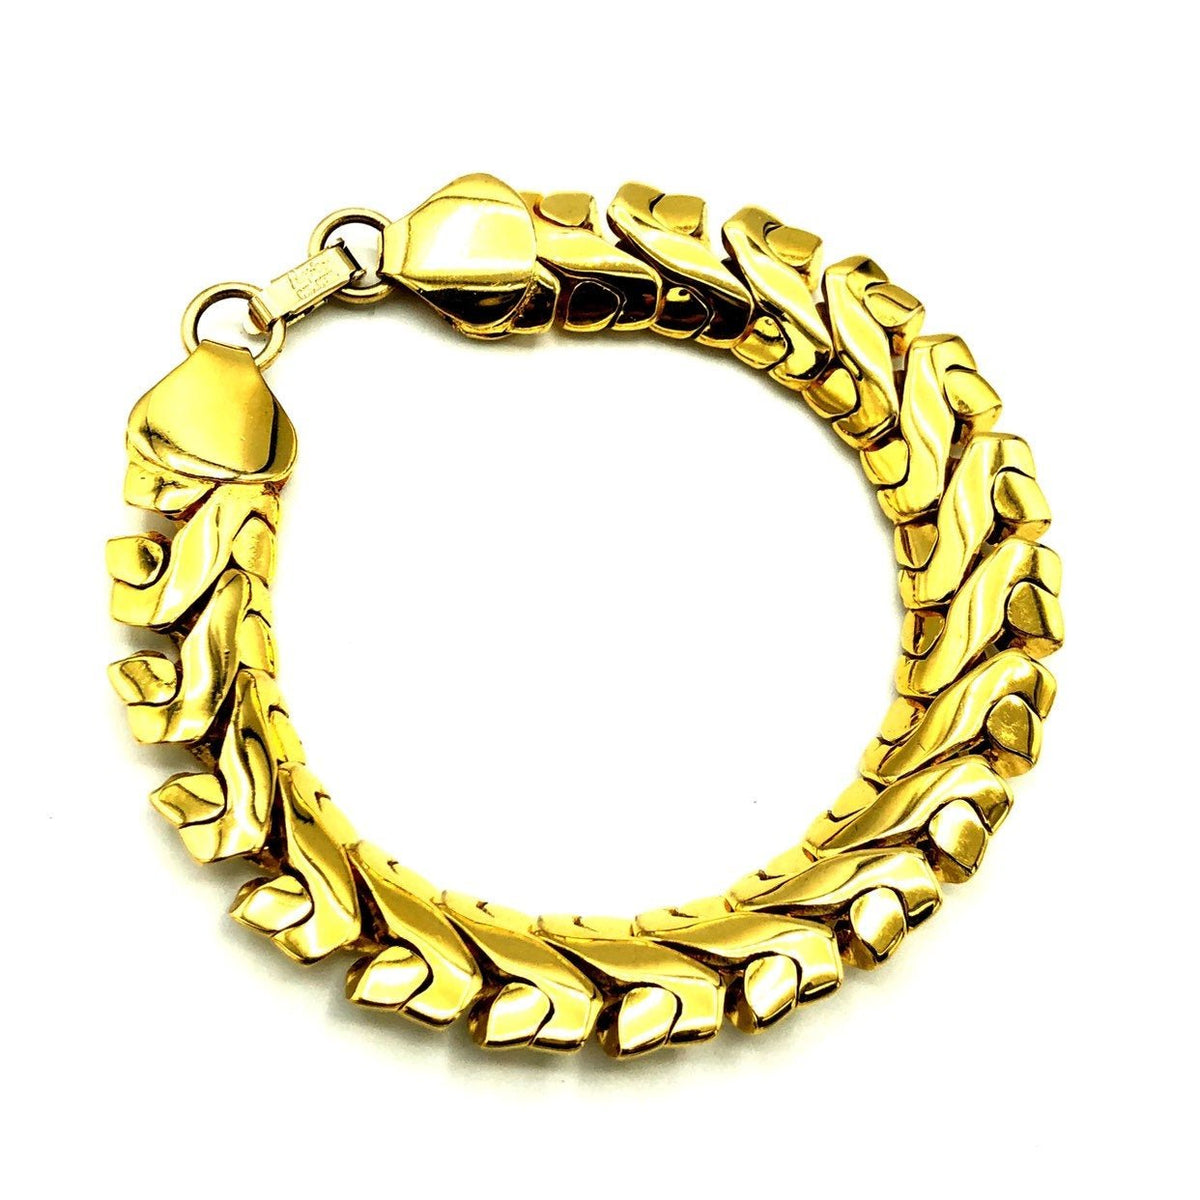 Napier Thick Gold Chain Vintage Stacking Bracelet - 24 Wishes Vintage Jewelry